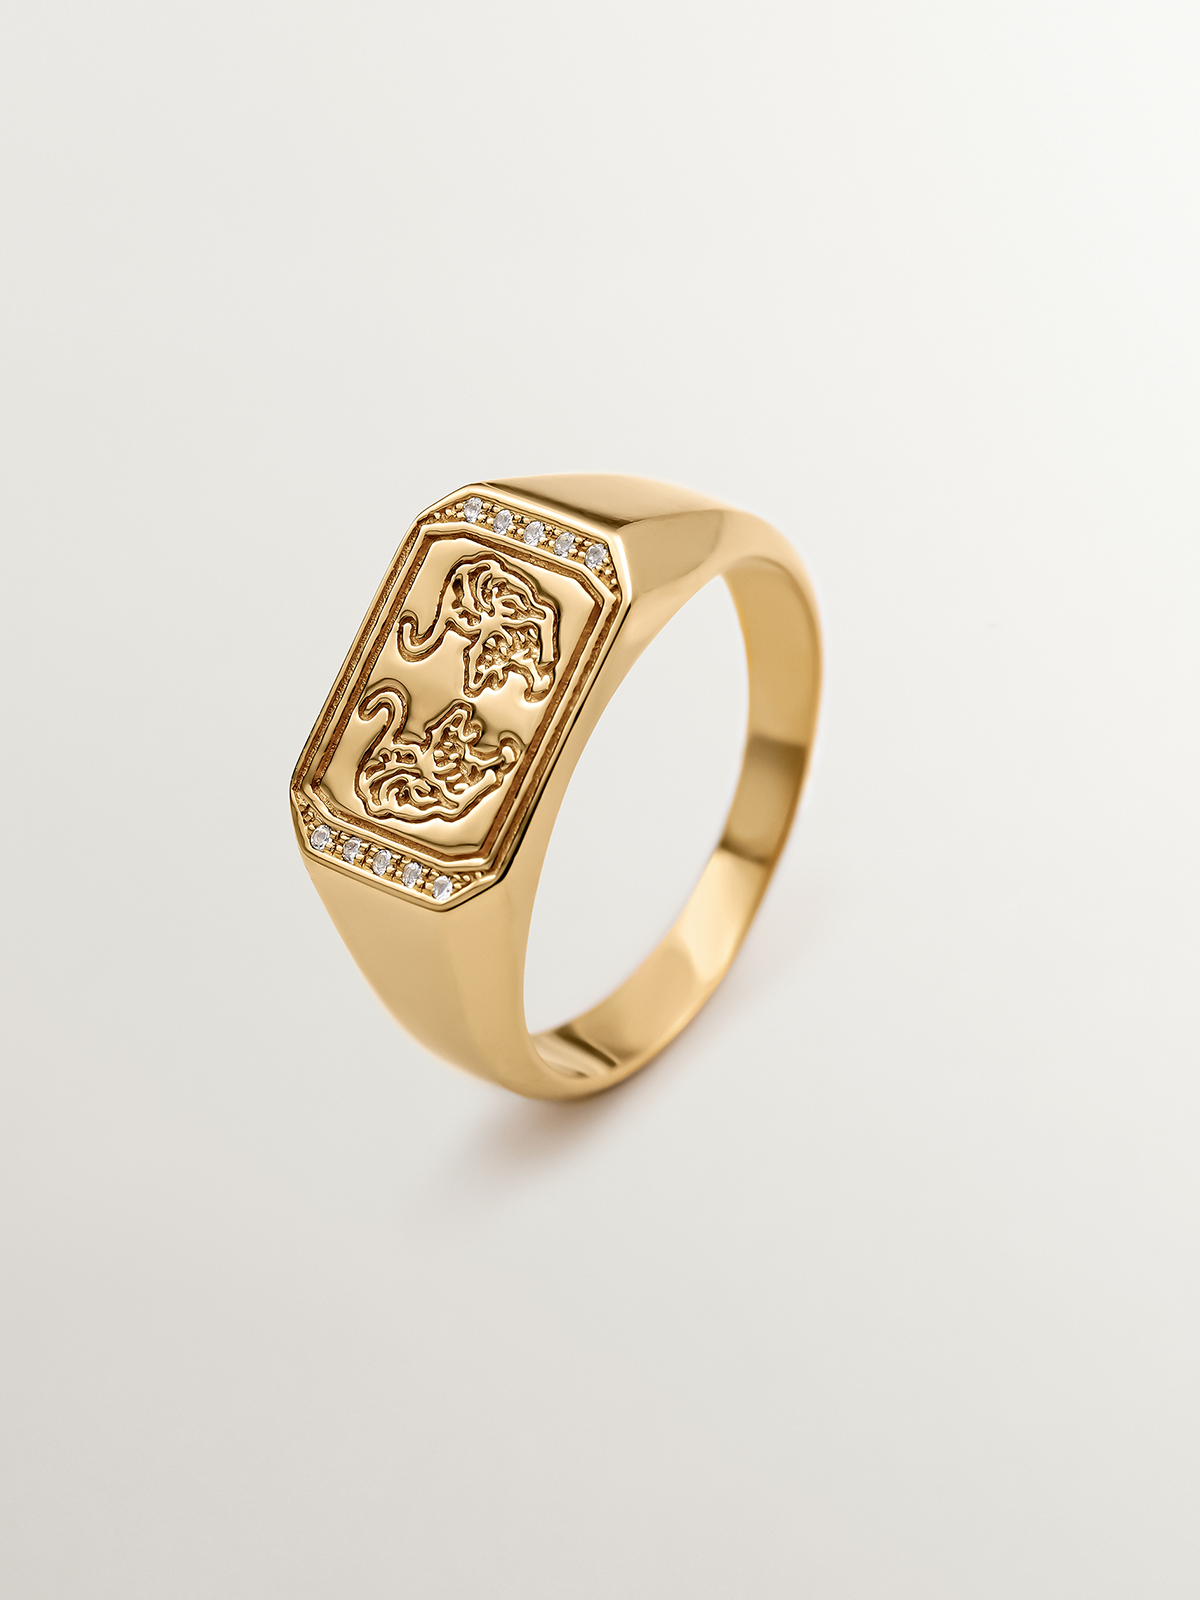 925 Silver signet ring bathed in 18K yellow gold with tigers and topazes.